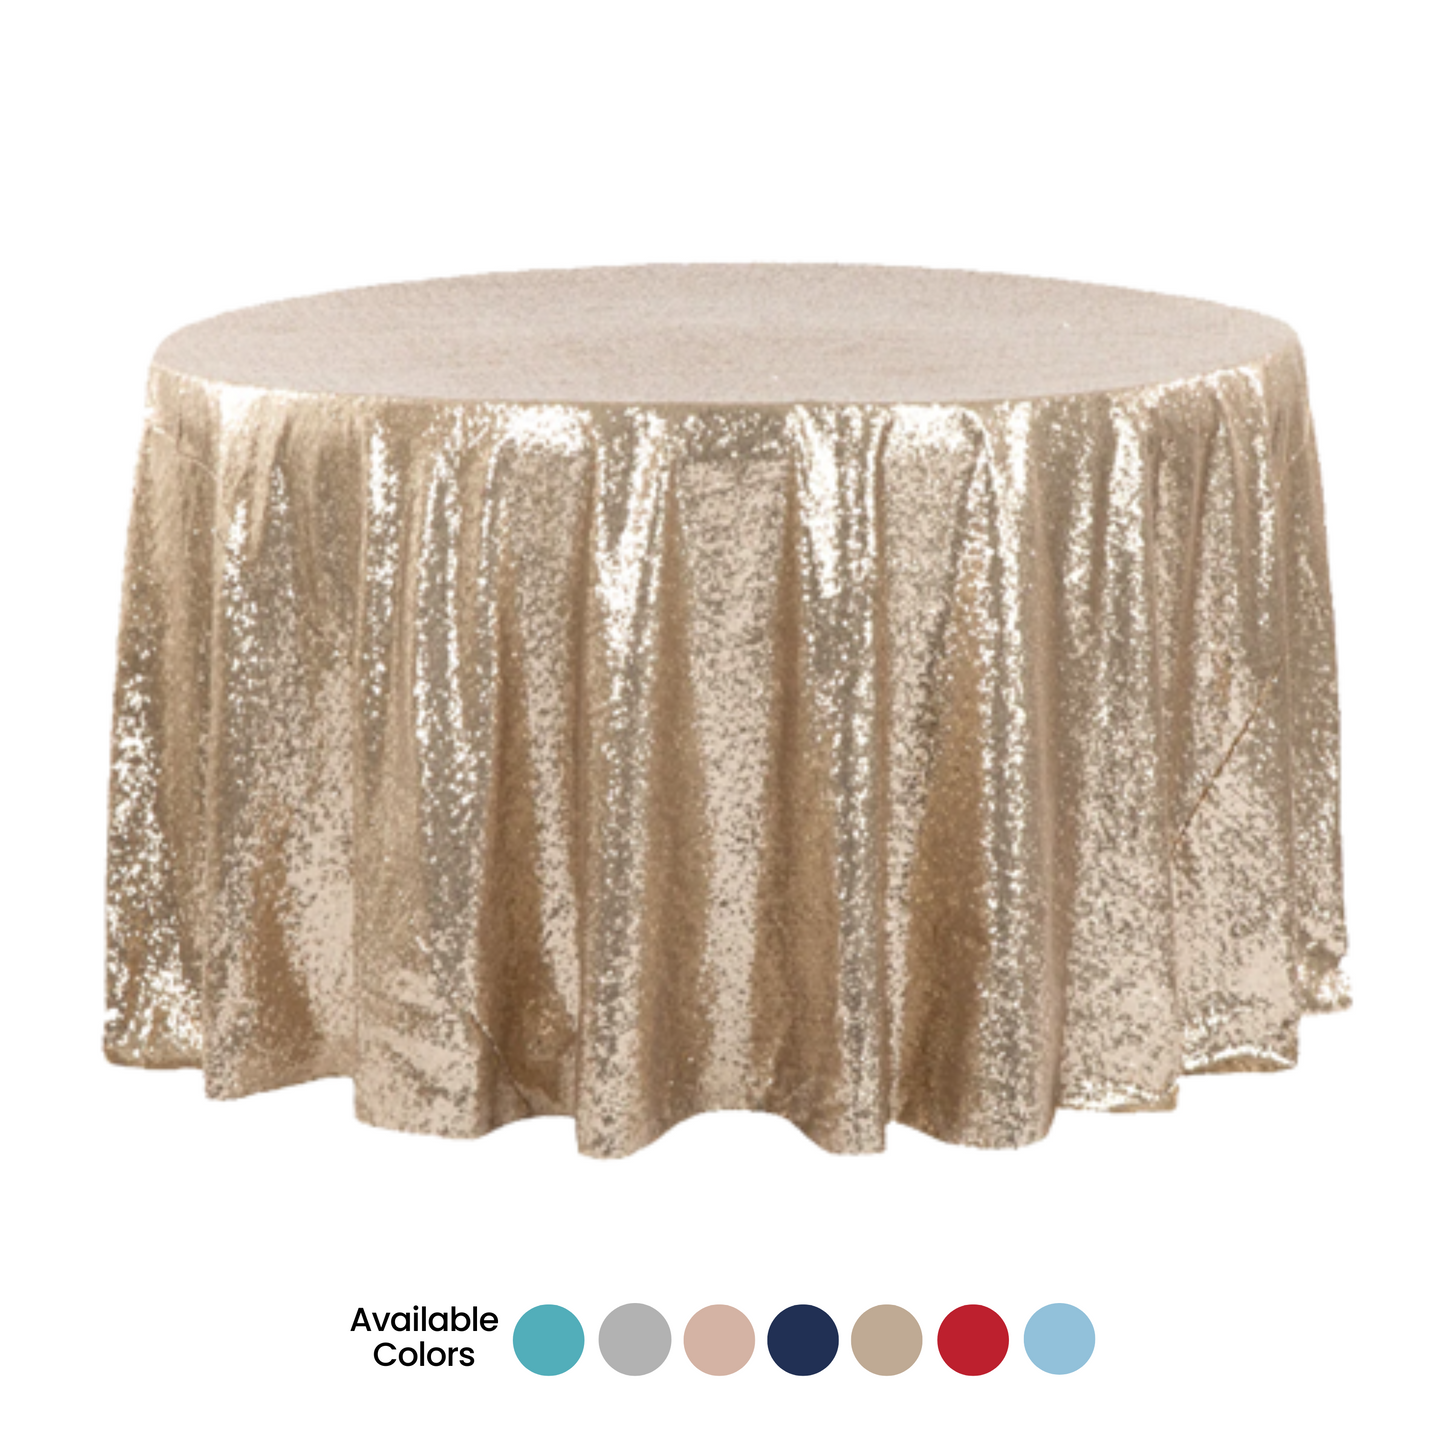 Round Table Linen (Sequin)